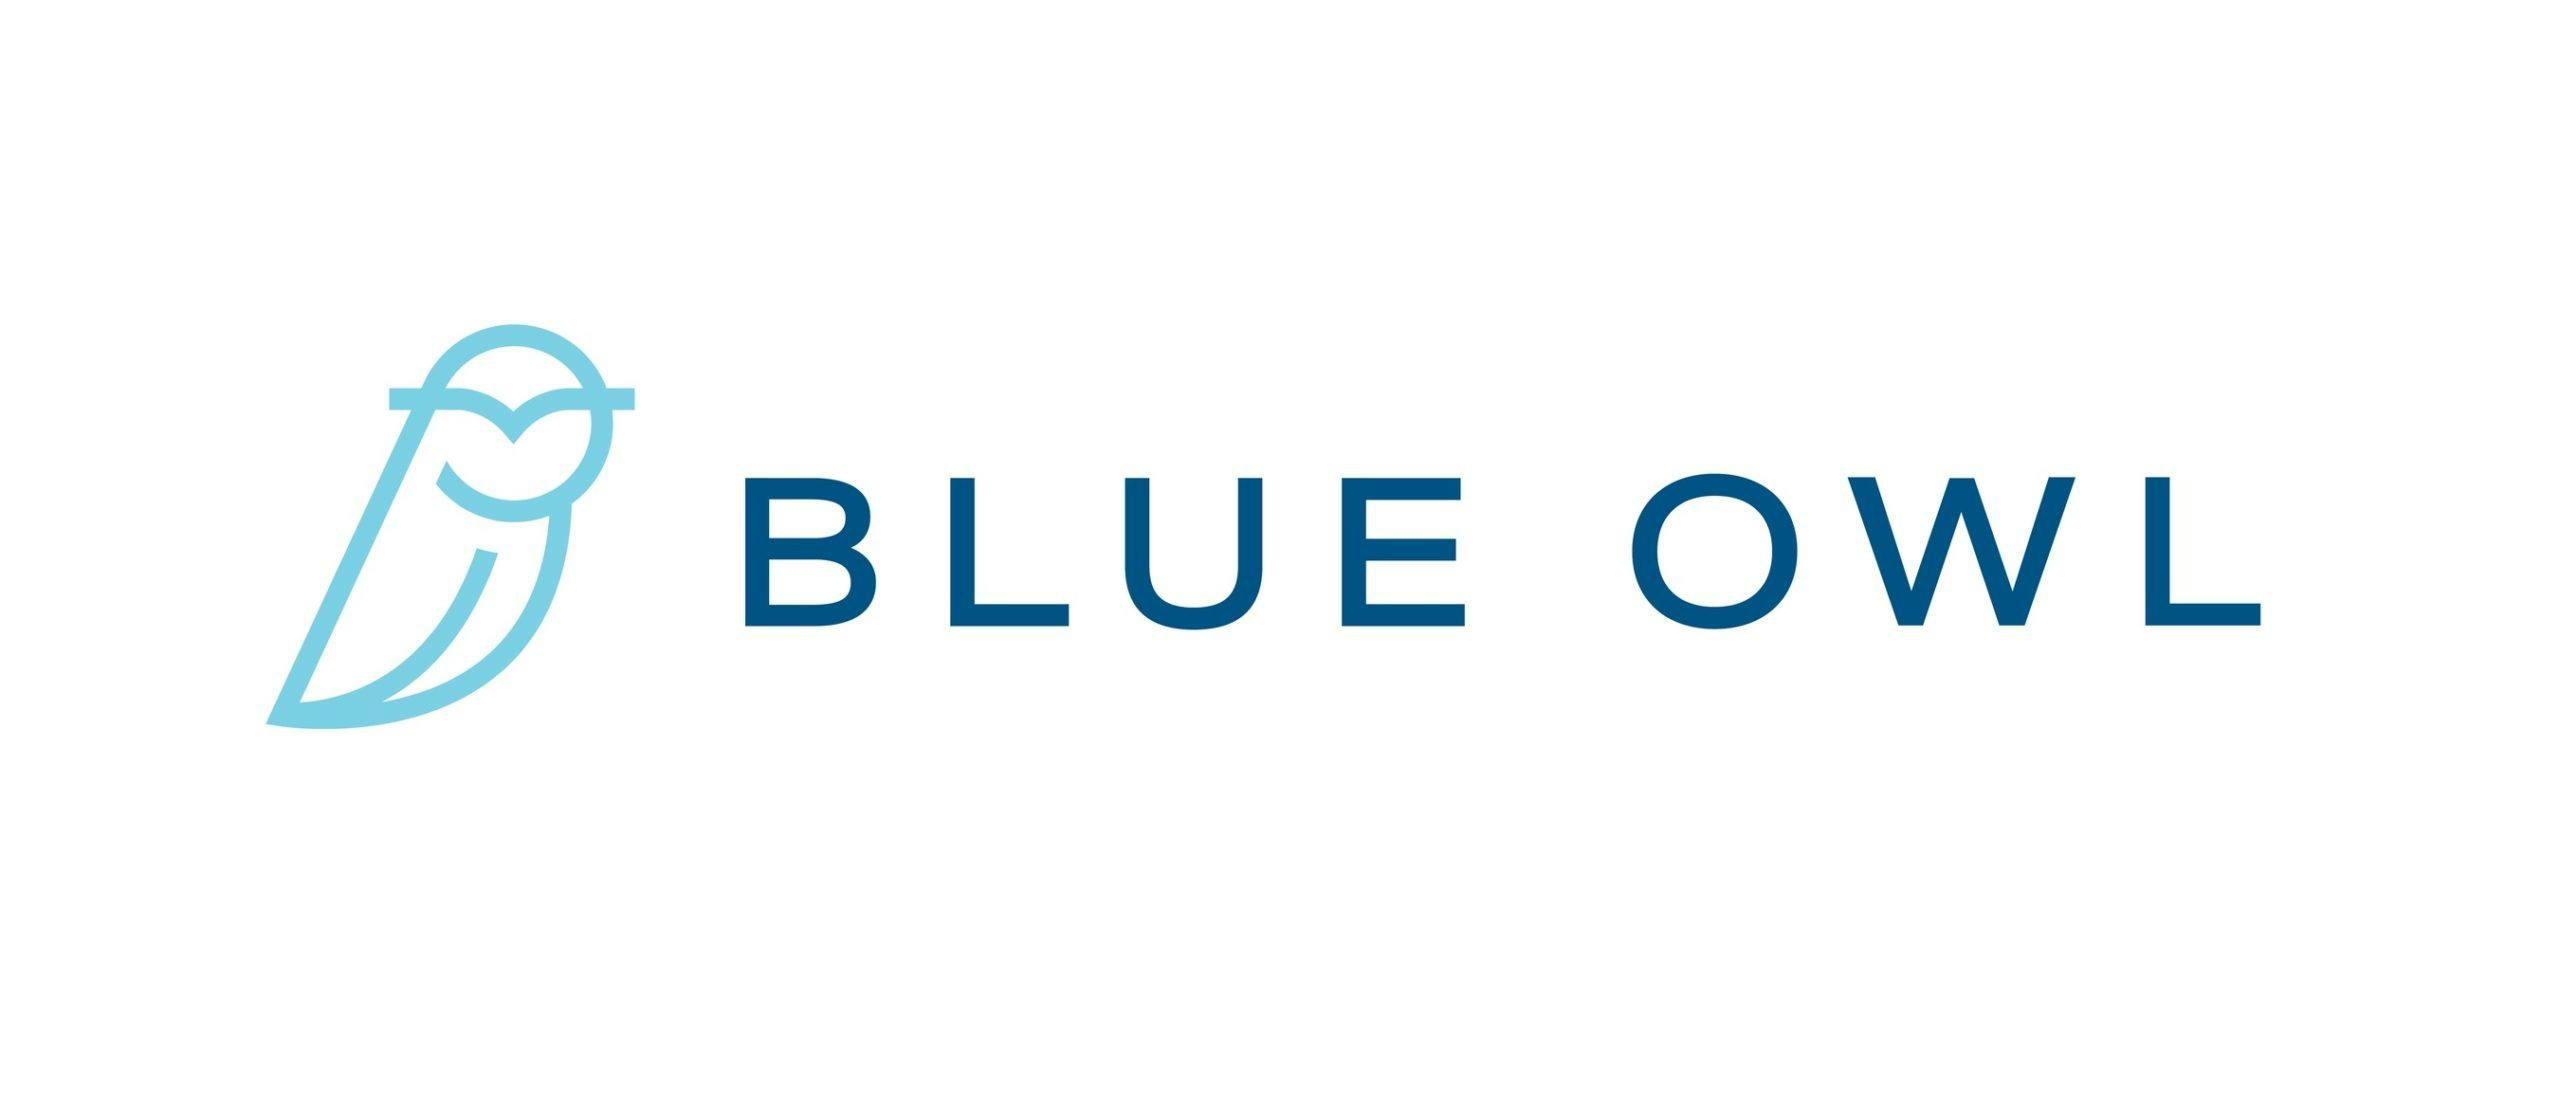 Blue Owl Capital (OWL) Announces Results of Redemption of Warrants